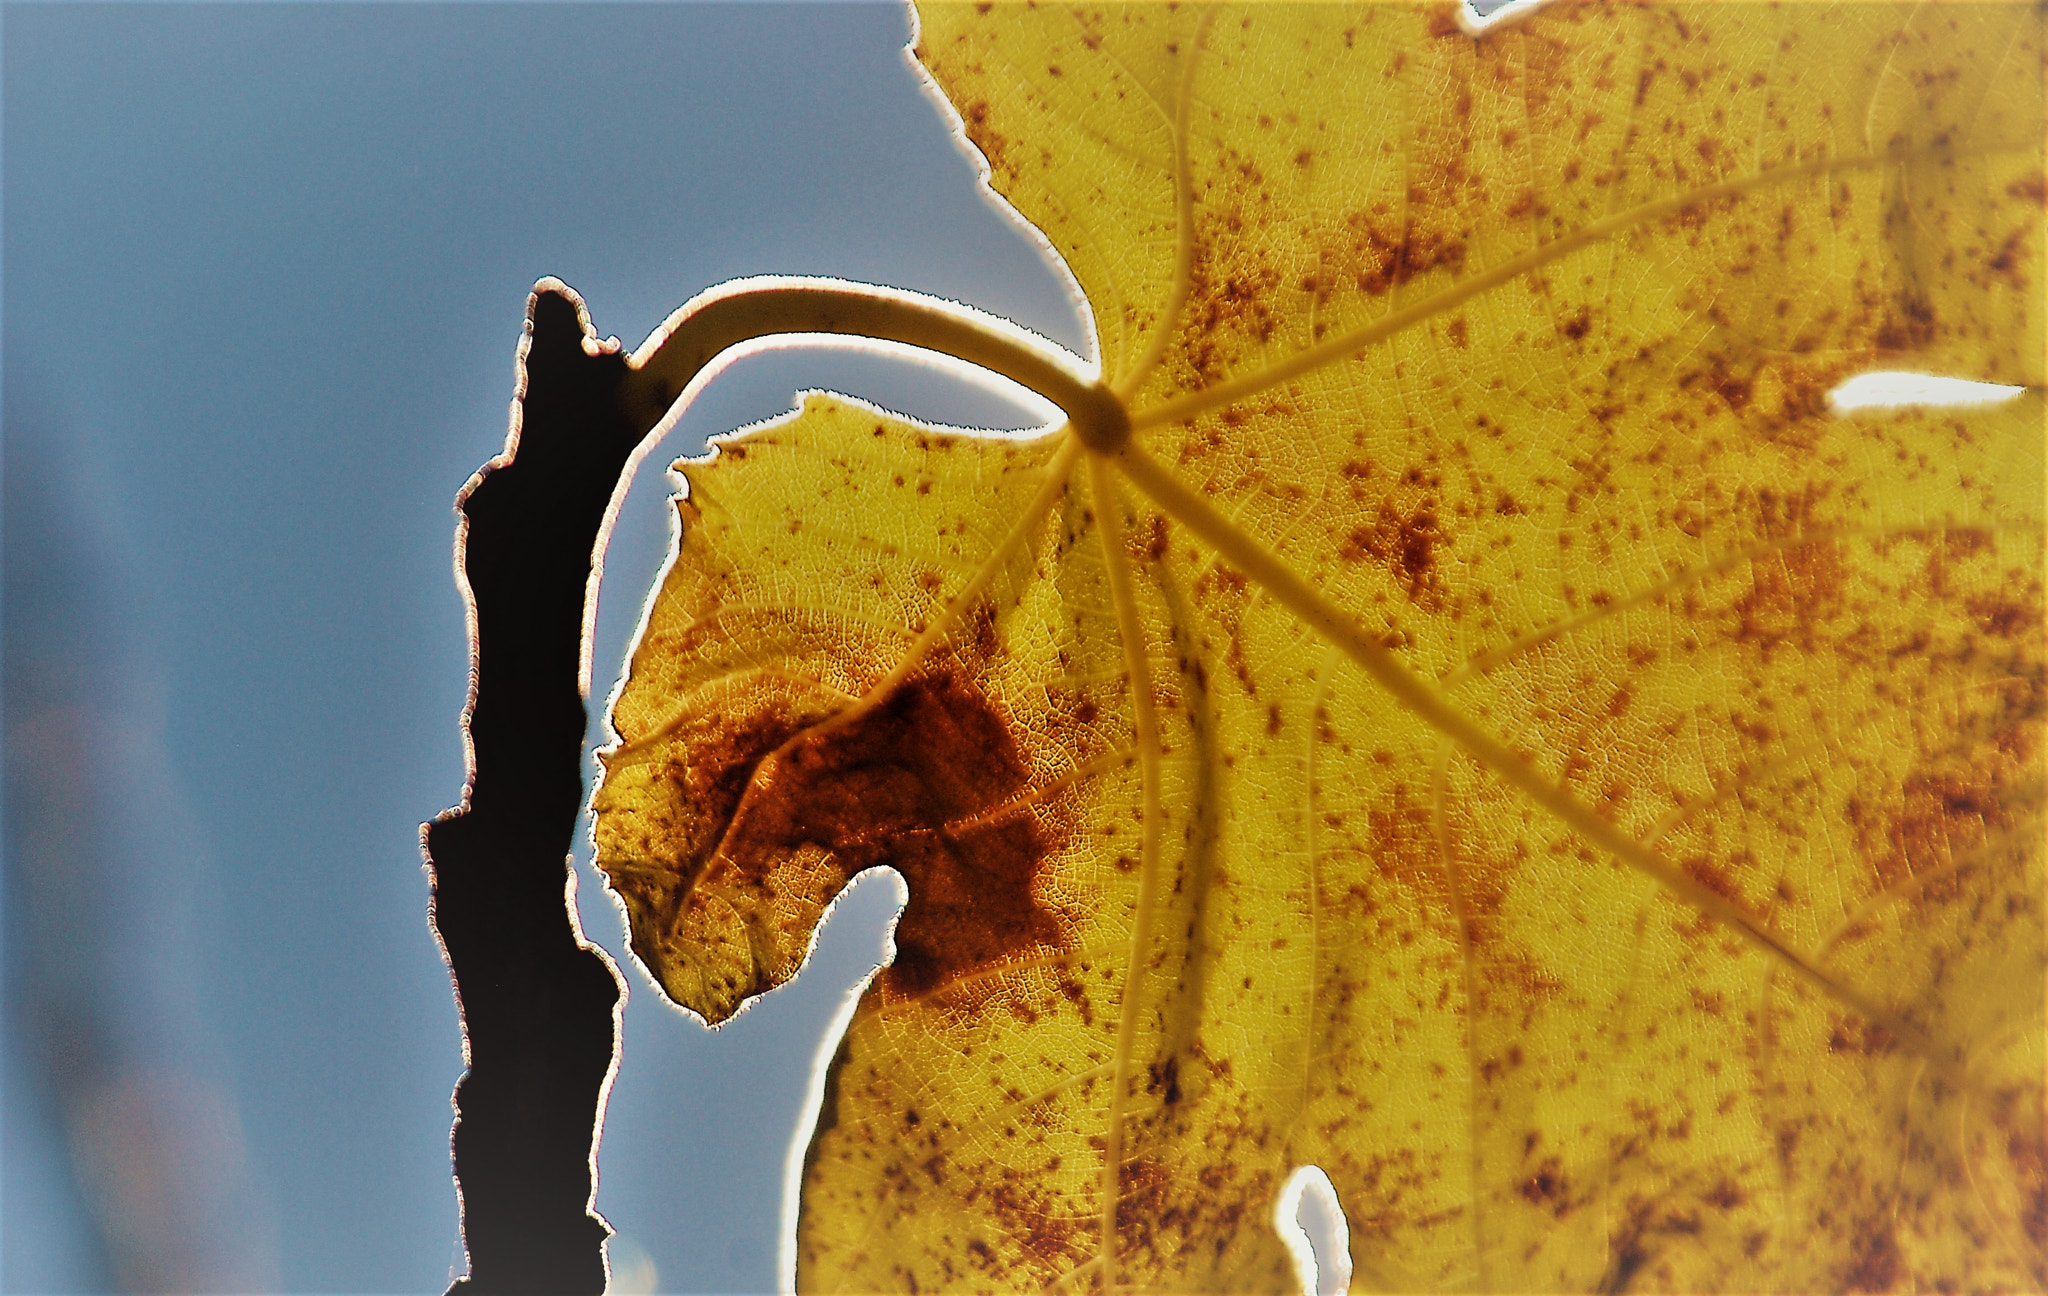 Nikon D80 sample photo. Fig leaf before the fall photography